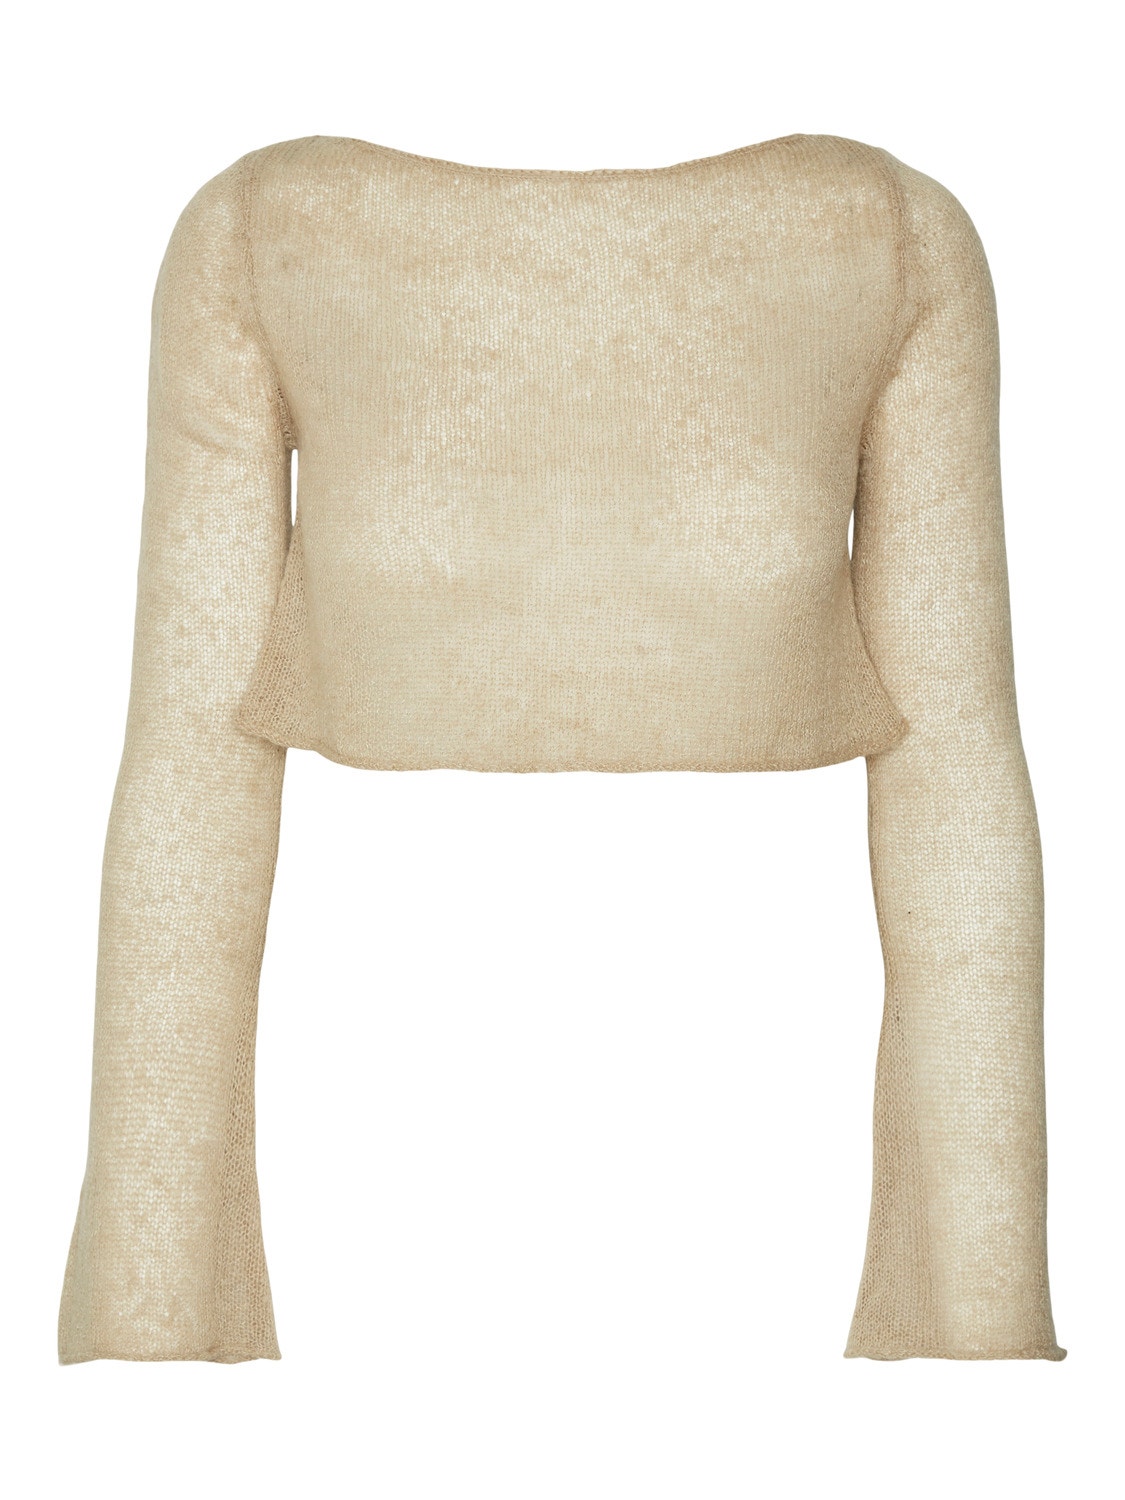 Vero Moda SOMETHING NEW PROJECT; CHLOE FRATER Pullover -Curds & Whey - 10301742